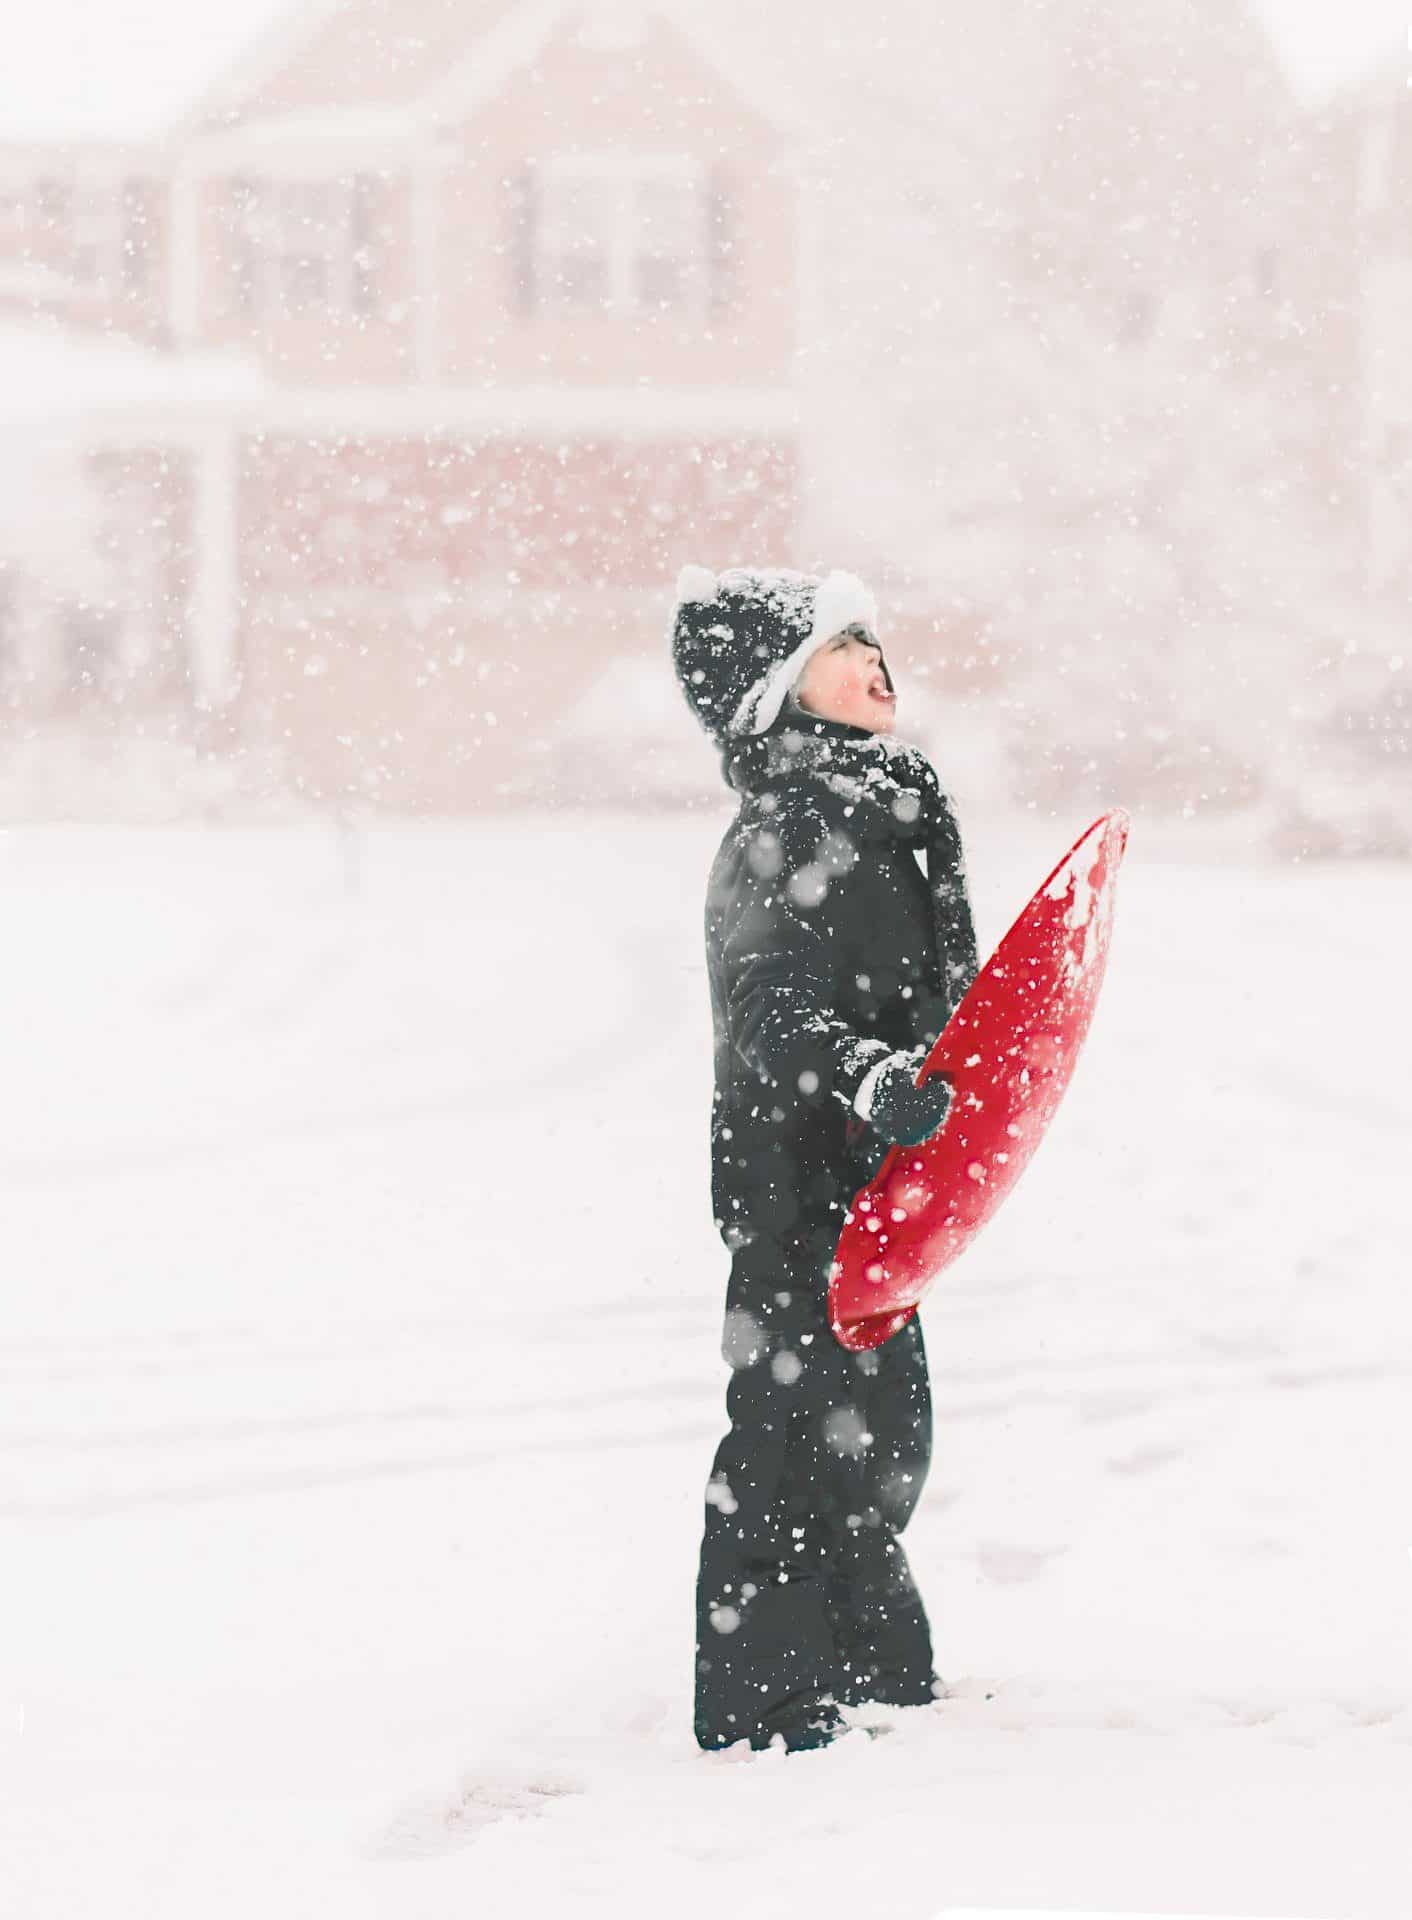 How To Conquer Winter Weather – Kids Edition